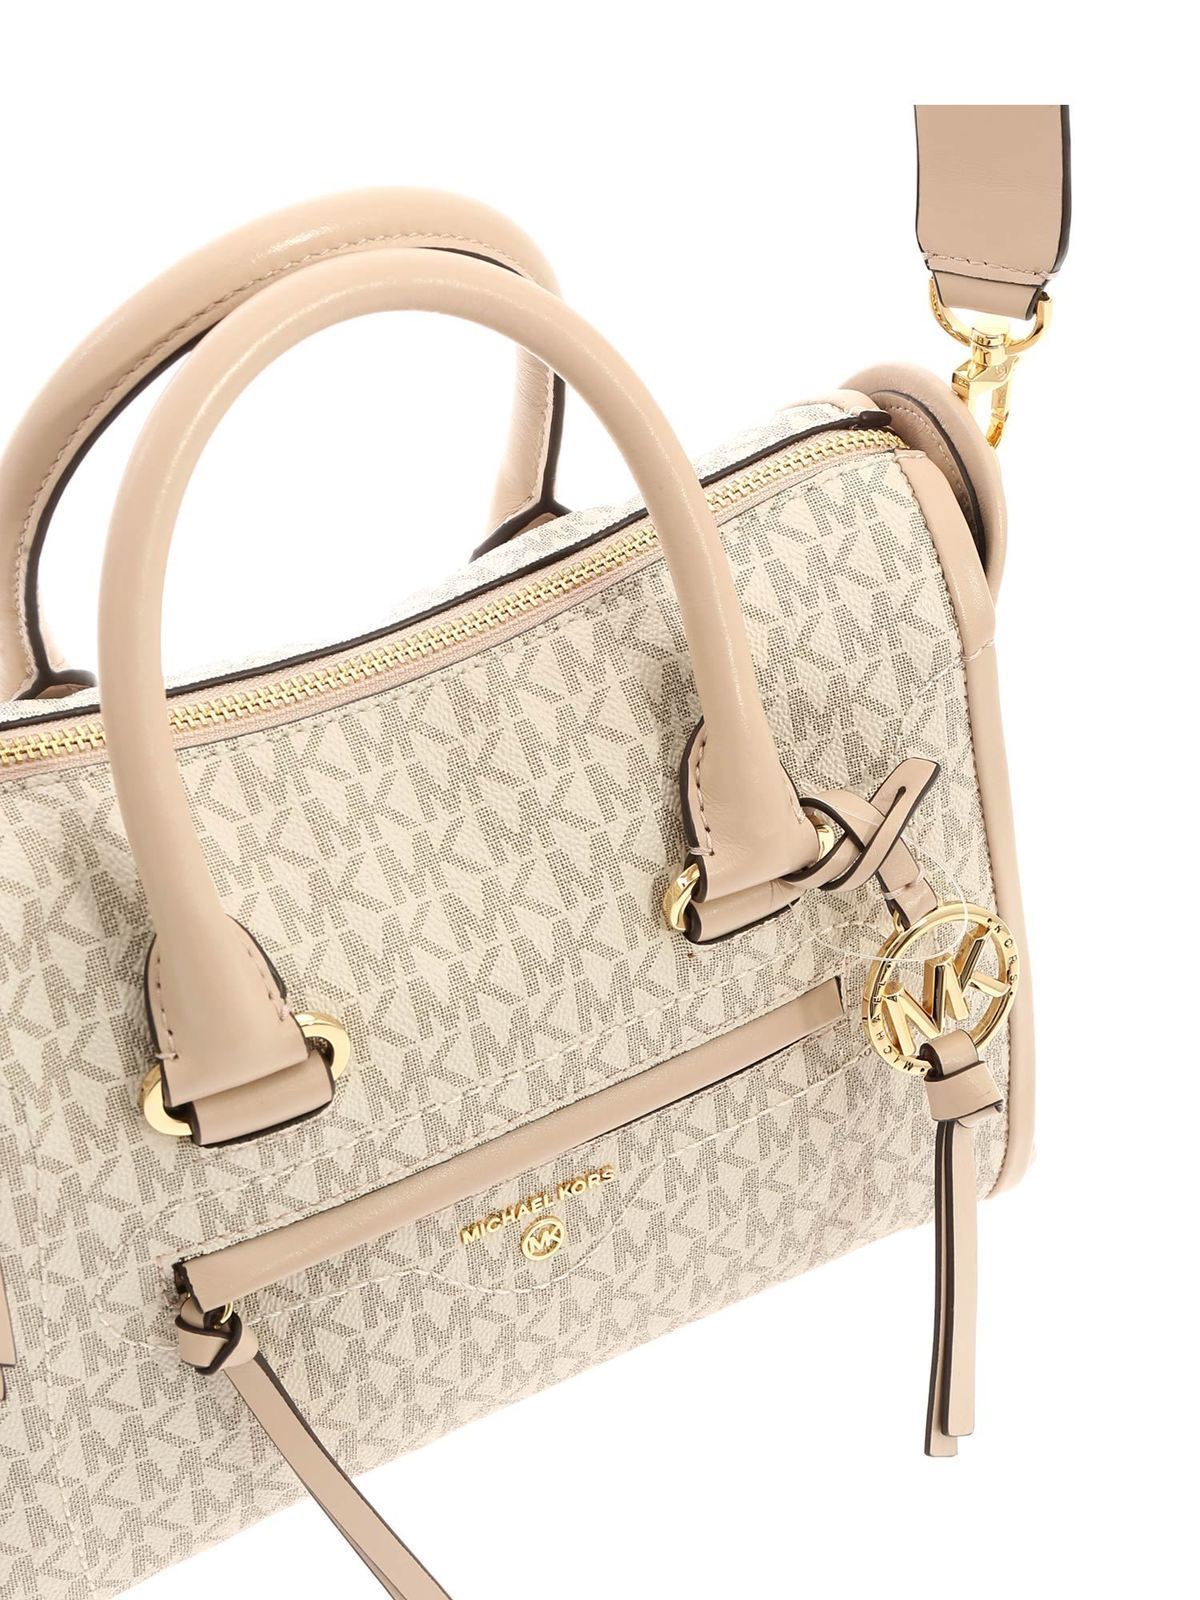 Totes bags Michael Kors Monogram bag in pink and ivory color - 30T0GCCS1B173